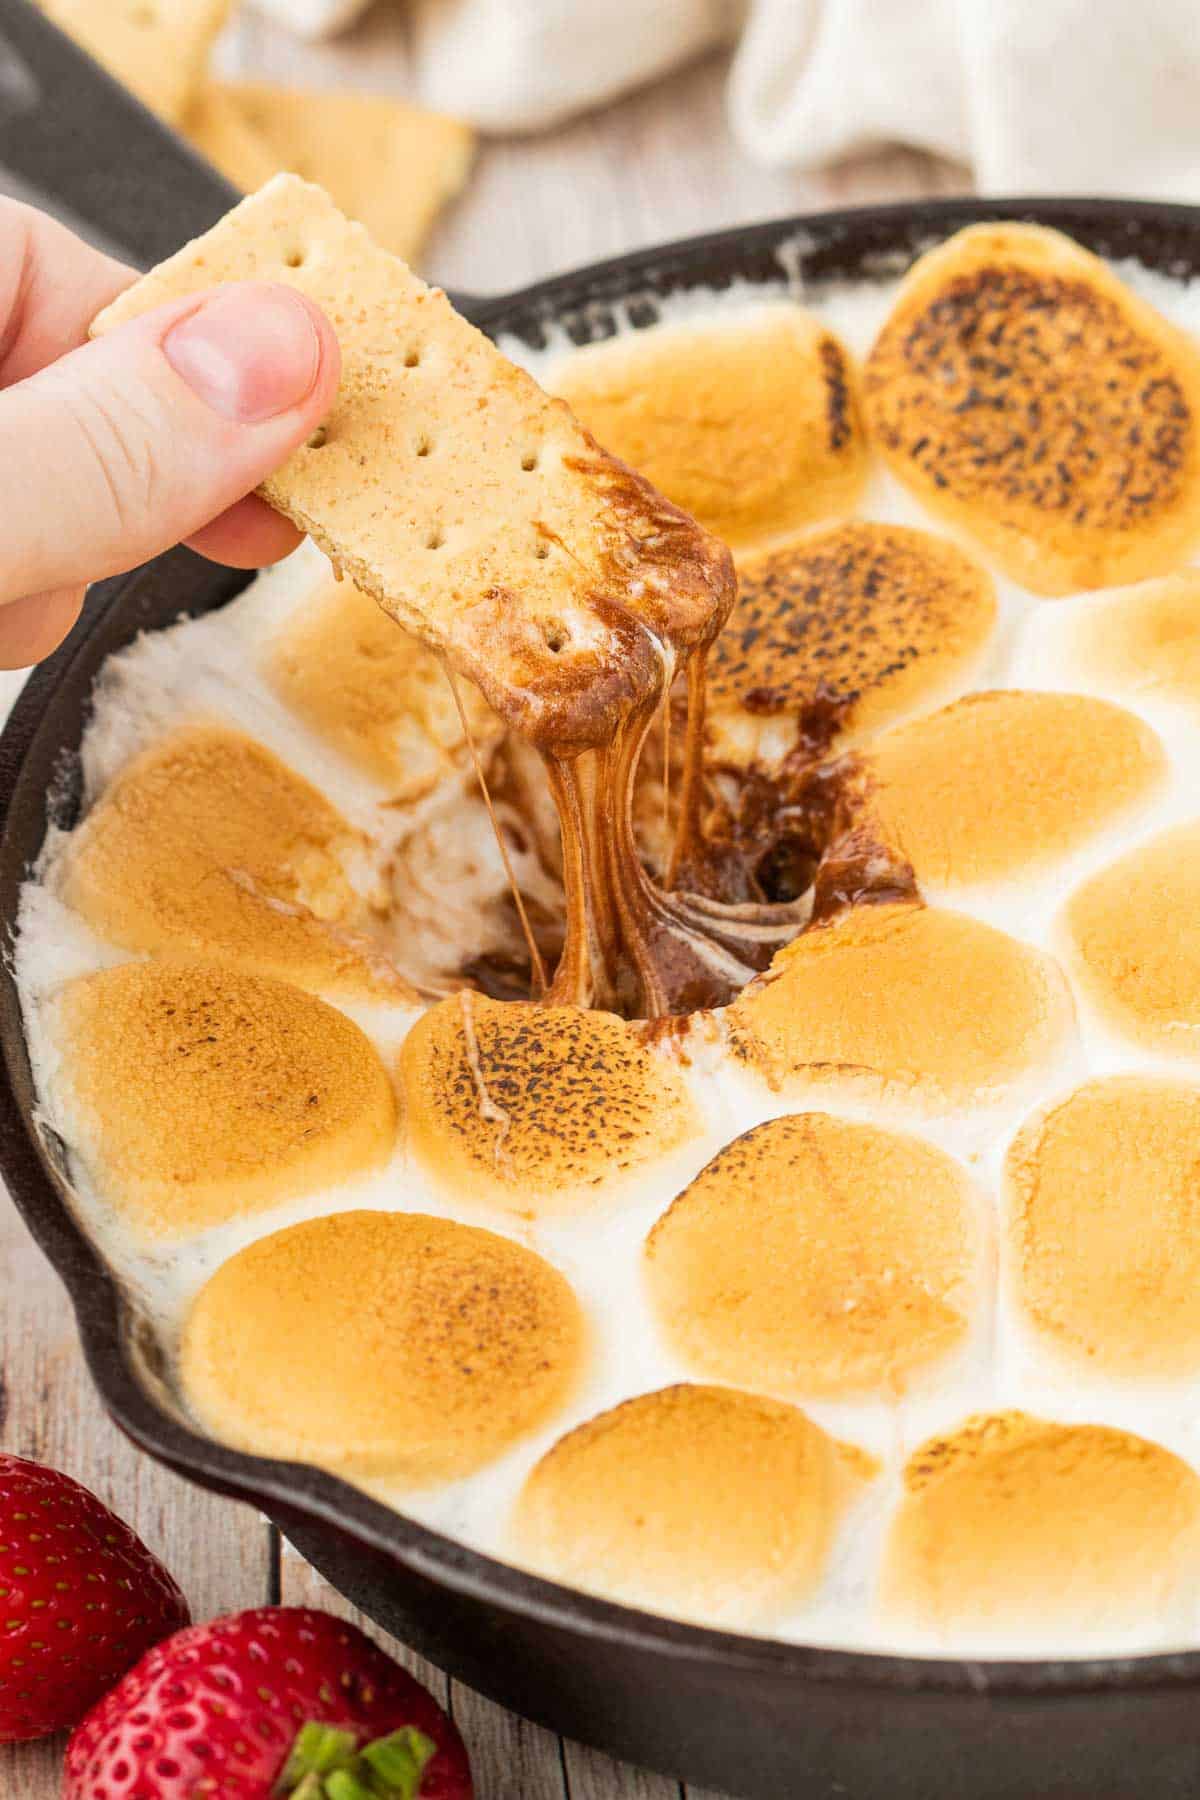 S'mores Dip is a simple and delicious dessert with a base of melted chocolate and topped with gooey toasted marshmallows perfect for scooping up with graham crackers, pretzels, cookies and fresh strawberries.